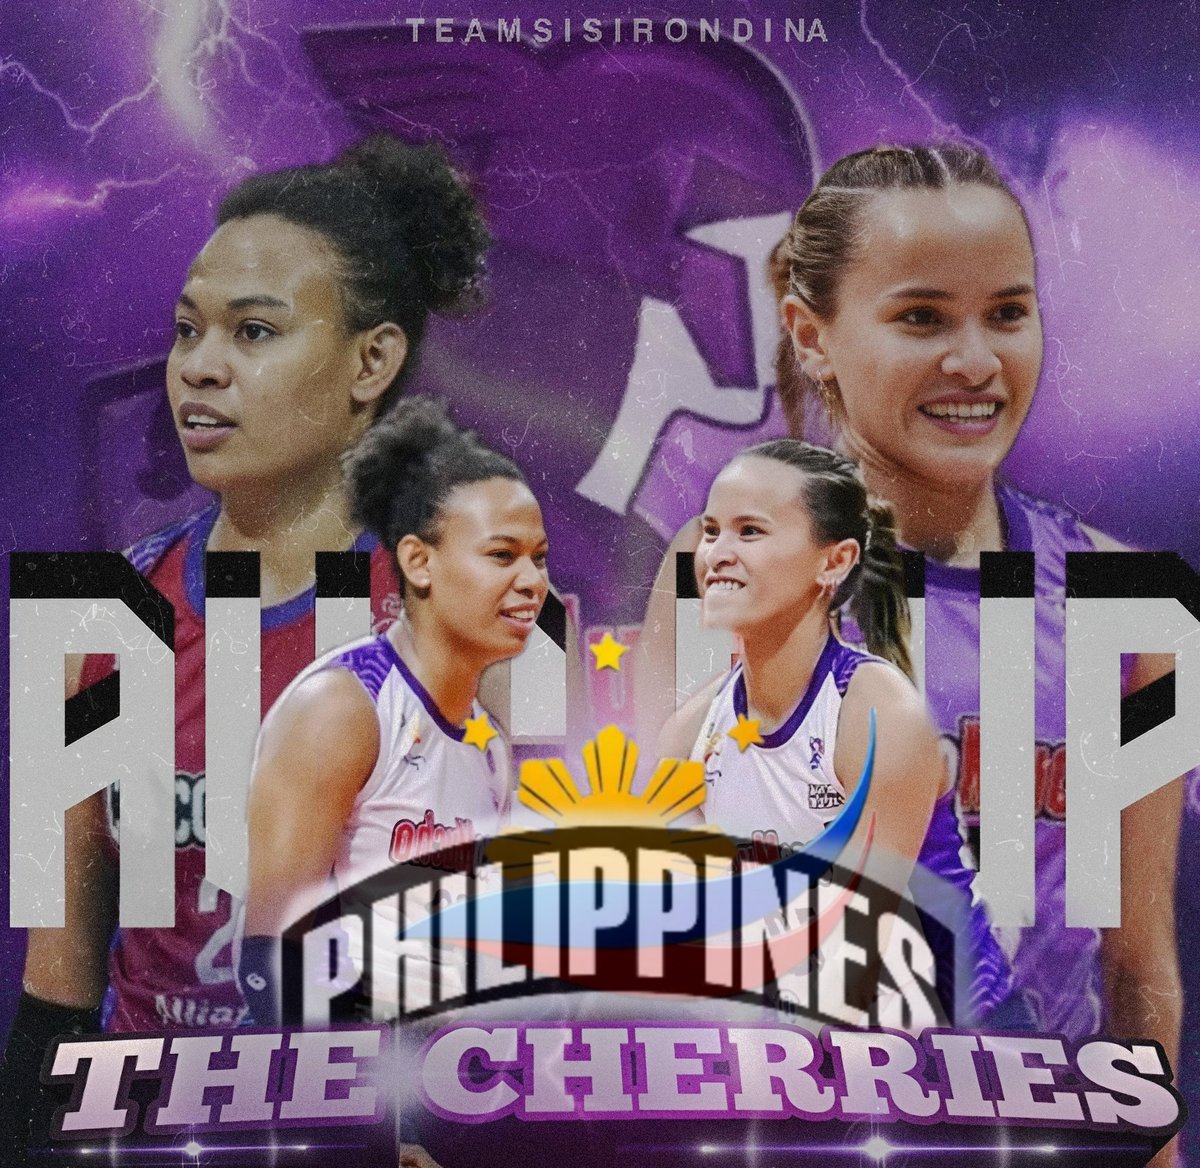 From PVL finals to AVC challenge cup! The cherries connection is on the way for the Philippine Team! #TitanPride #Philippines  💜🇵🇭